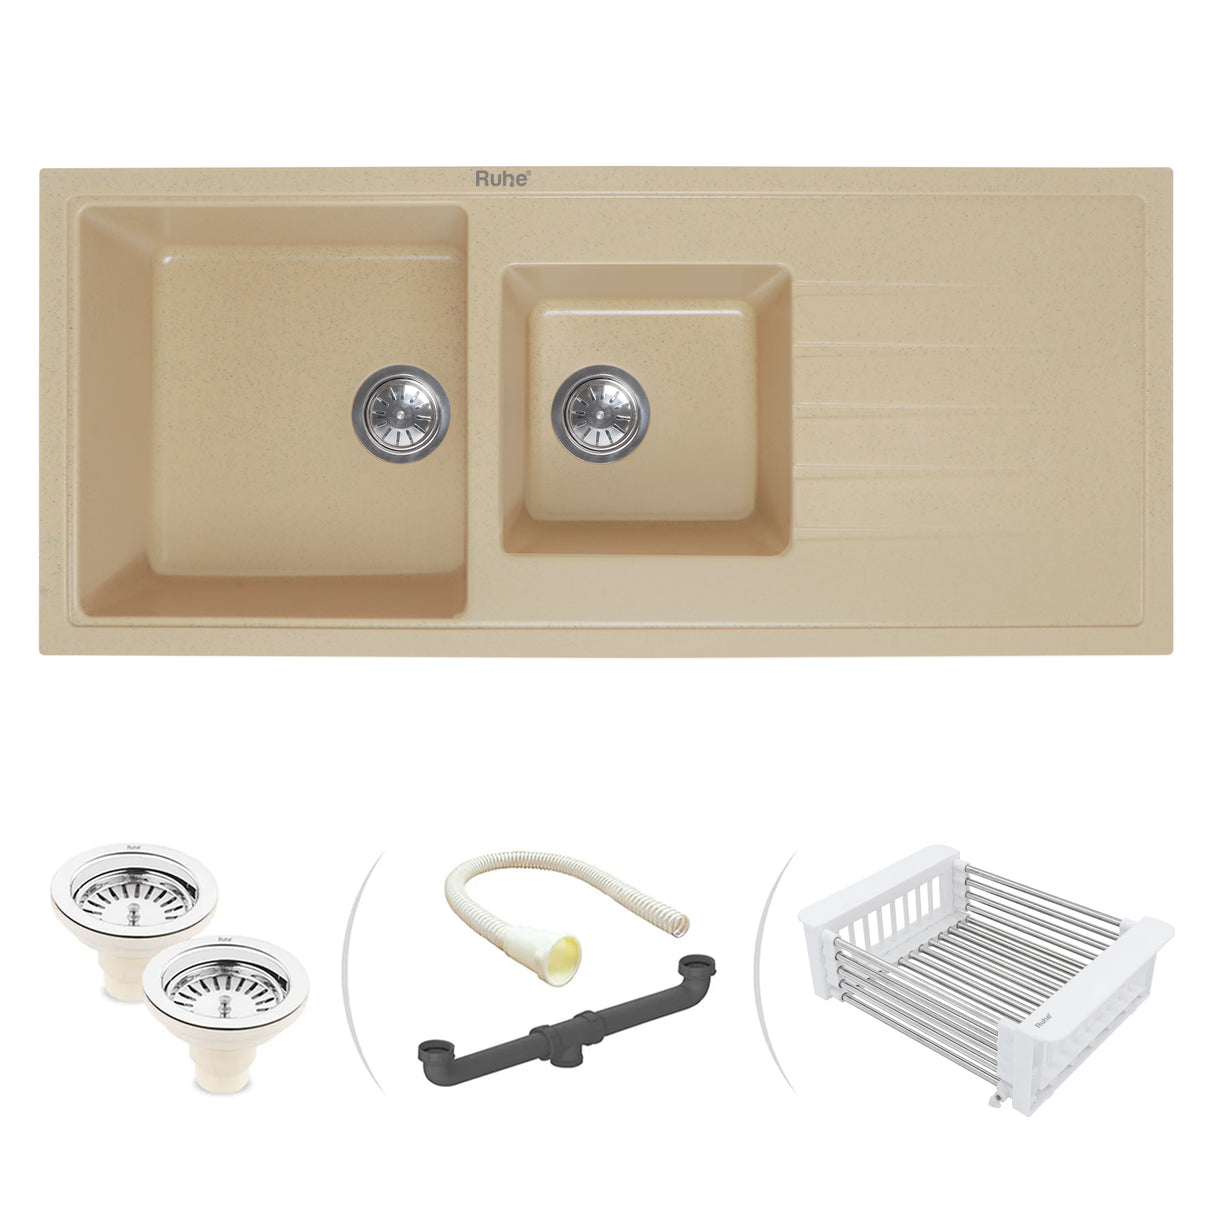 Quartz Double Bowl with Drainboard Kitchen Sink - Sand Choco (45 x 20 x 9 inches) - by Ruhe®